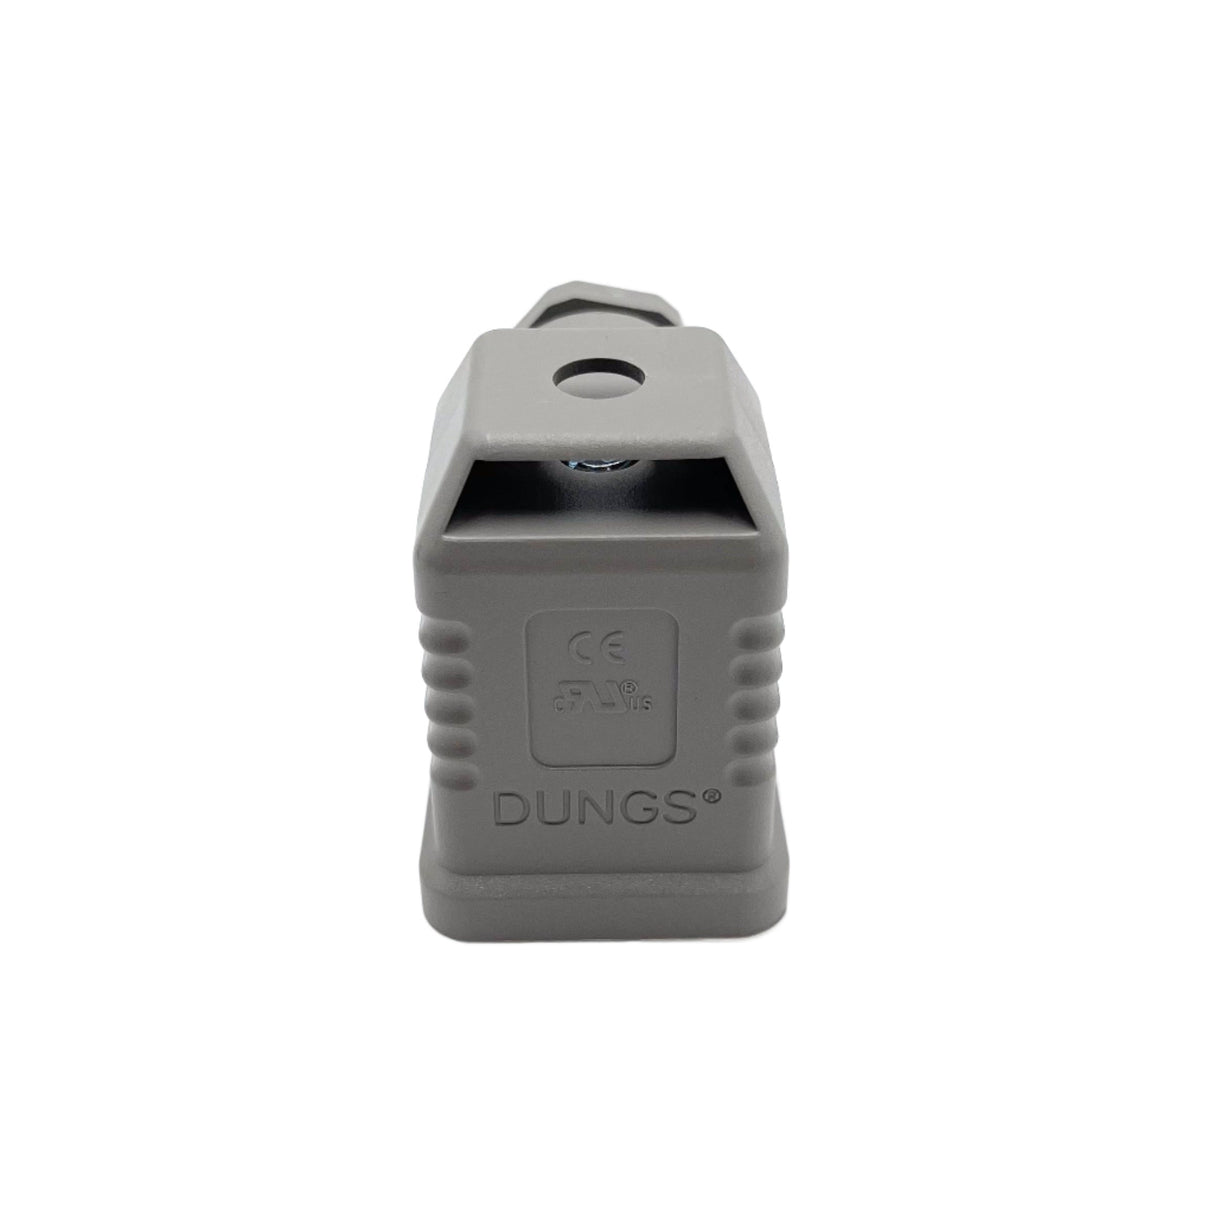 Dungs Pressure Switch Plug - 210318